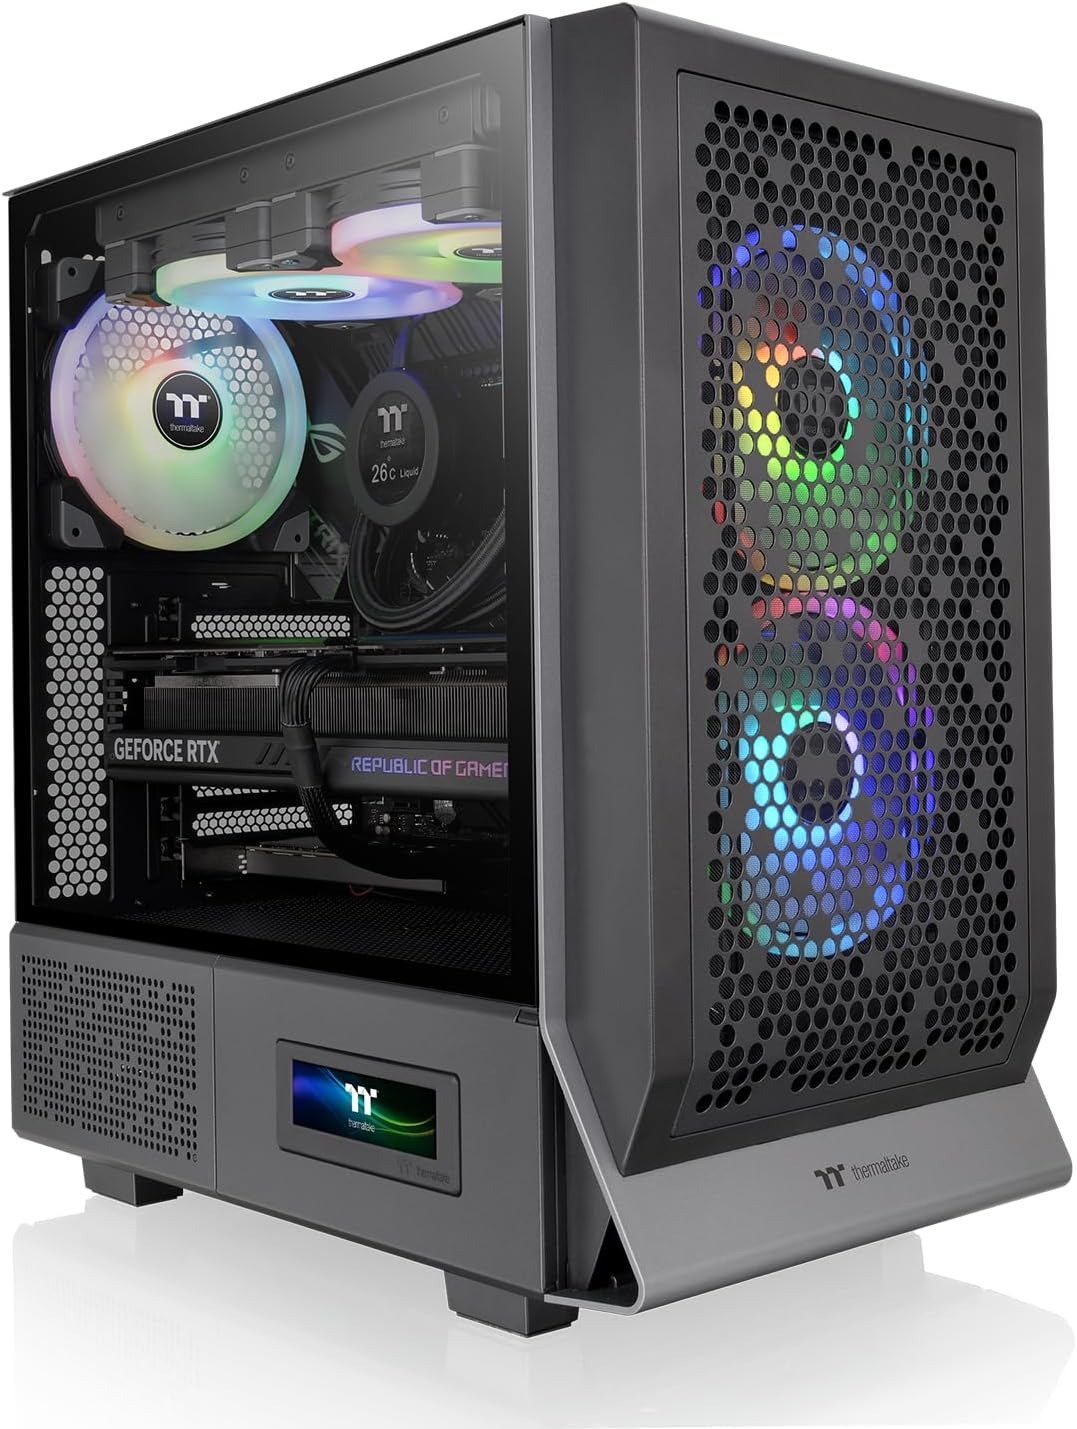 Ceres 300 Tempered Glass ARGB Mid Tower E-ATX Case Black Edition, CA-1Y2-00M1WN-